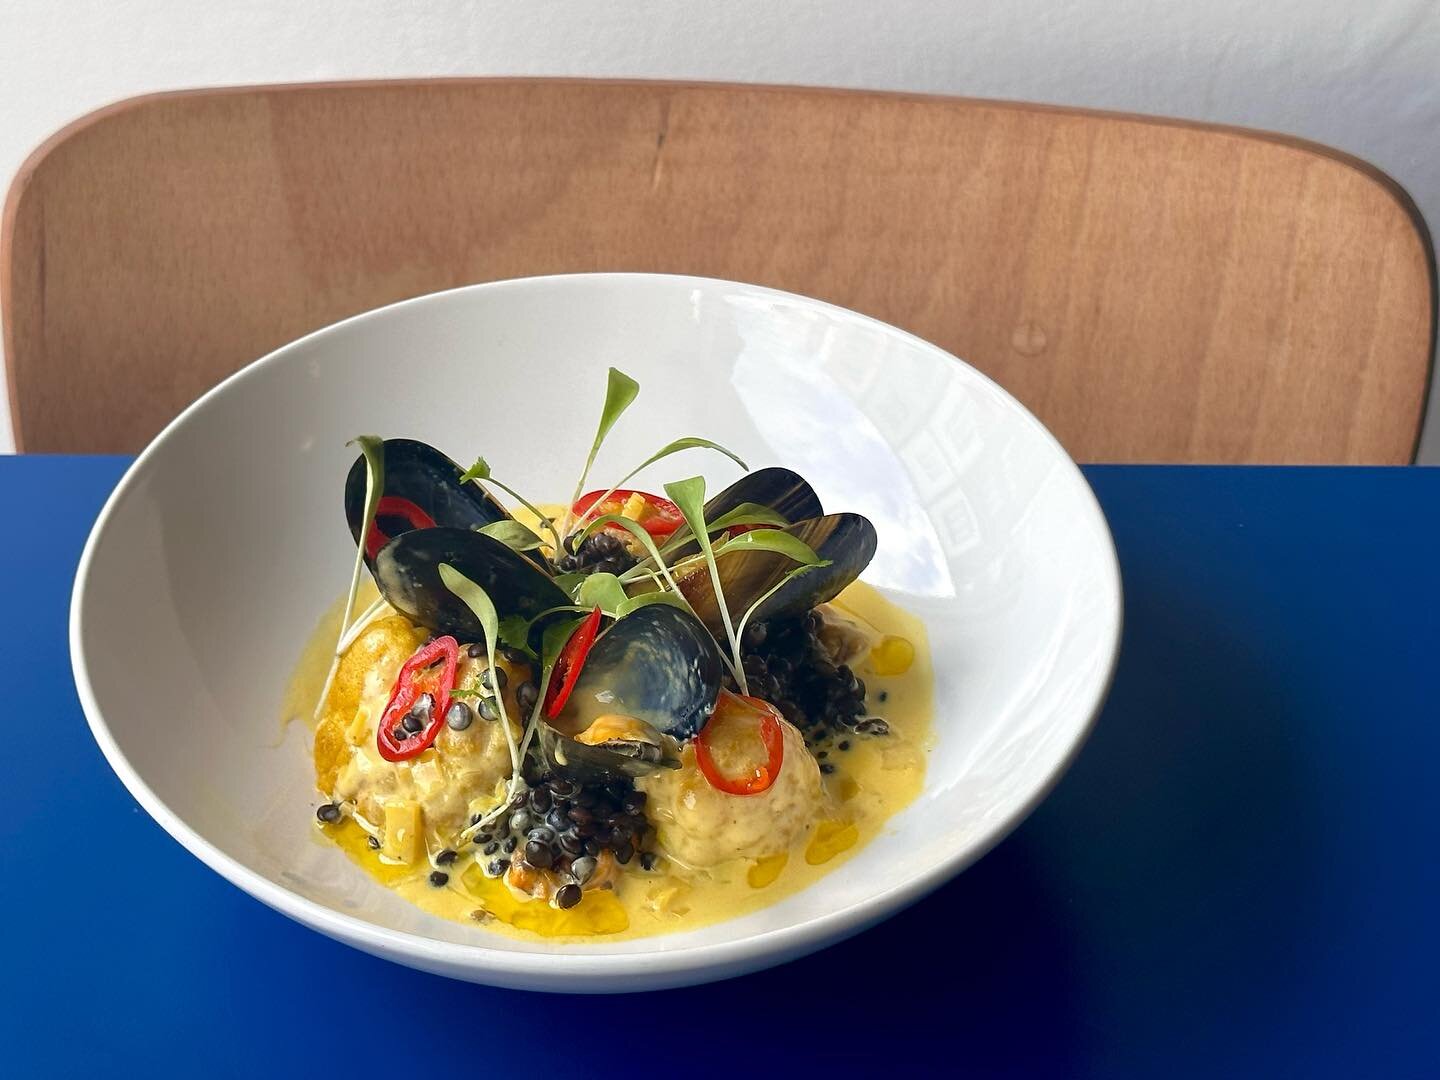 Mussels with Saffron, Spiced Cauliflower and Beluga Lentils

This decadent little bowl of goodness is here to lift your taste buds and your spirits this October.

Open: Tue-Sat
Kitchen: 6pm-9:30pm
Bar: 6pm-close 

Our weekly offers&hellip;
Tuesdays: 